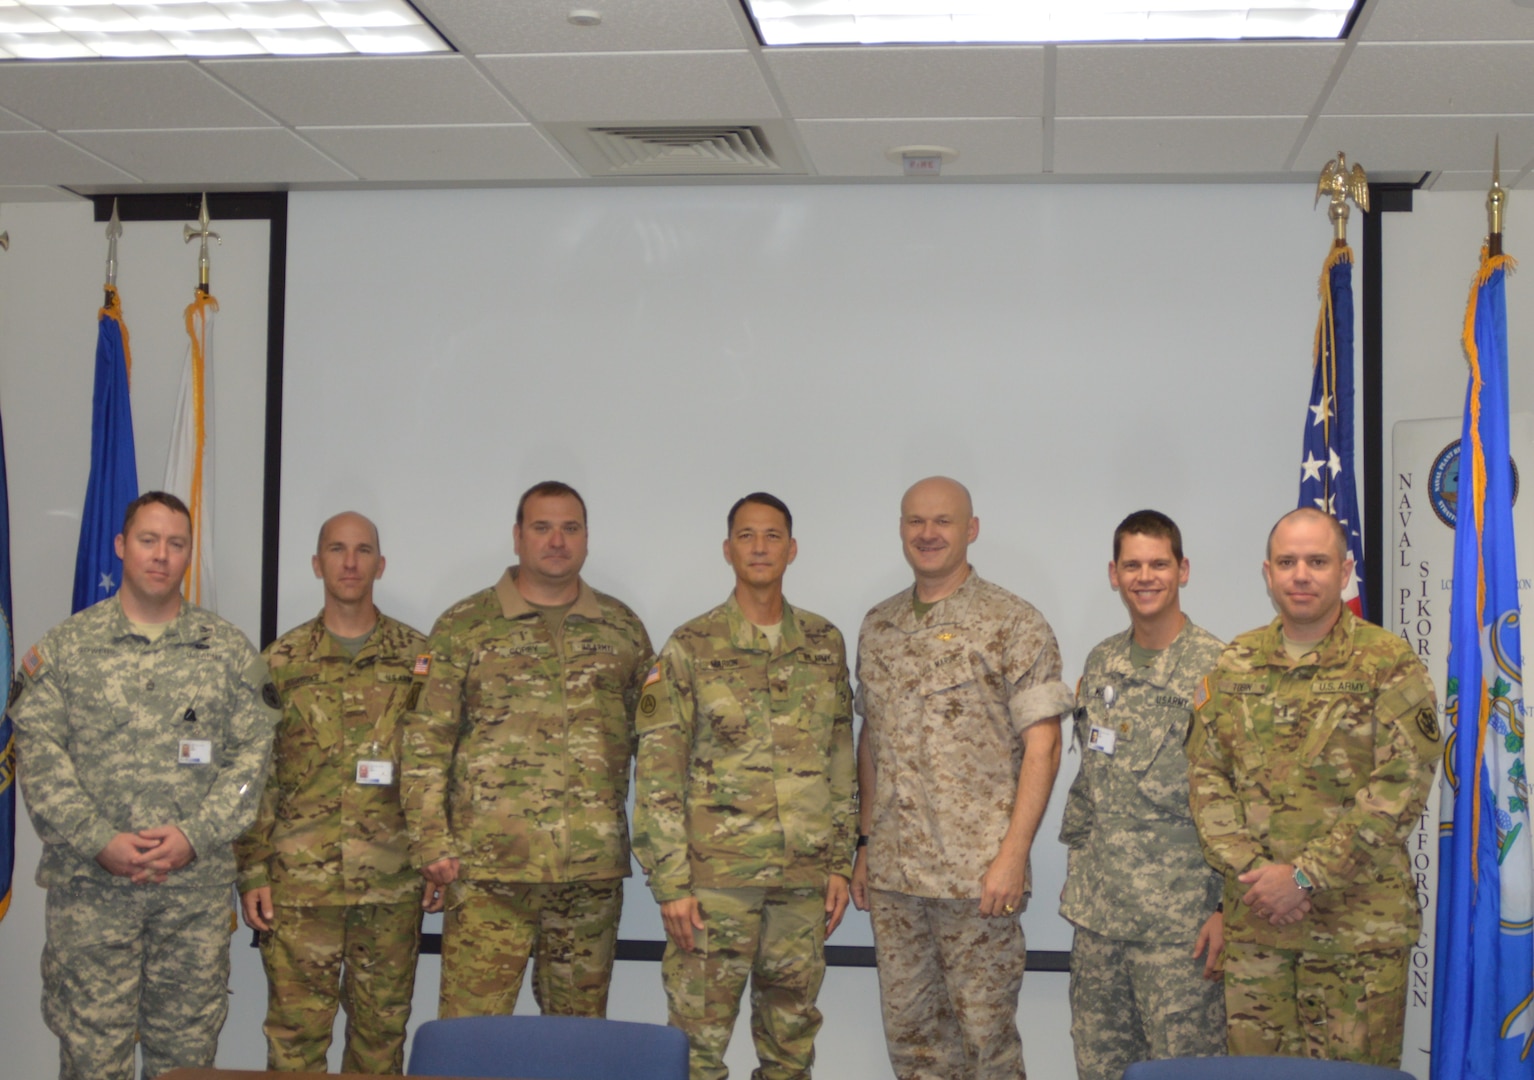 Army Brig. Gen. Robert Marion, program executive officer for Aviation (center), meets with military members of DCMA Sikorsky in Stratford, Connecticut, Oct. 13, during the agency’s ceremony celebrating the 1,000th Black Hawk delivery to the Army. From left to right: Army Sgt. 1st Class William Sowers; Army Chief Warrant Officer 5 Mike Bobkoskie; Army Chief Warrant Officer 4 Vance Corey; Marion; Marine Col. Jack Perrin; Army Maj. Rob Massey; Army Chief Warrant Officer 4 Michael Tobin. (DCMA photo by Steven Kaufman)


